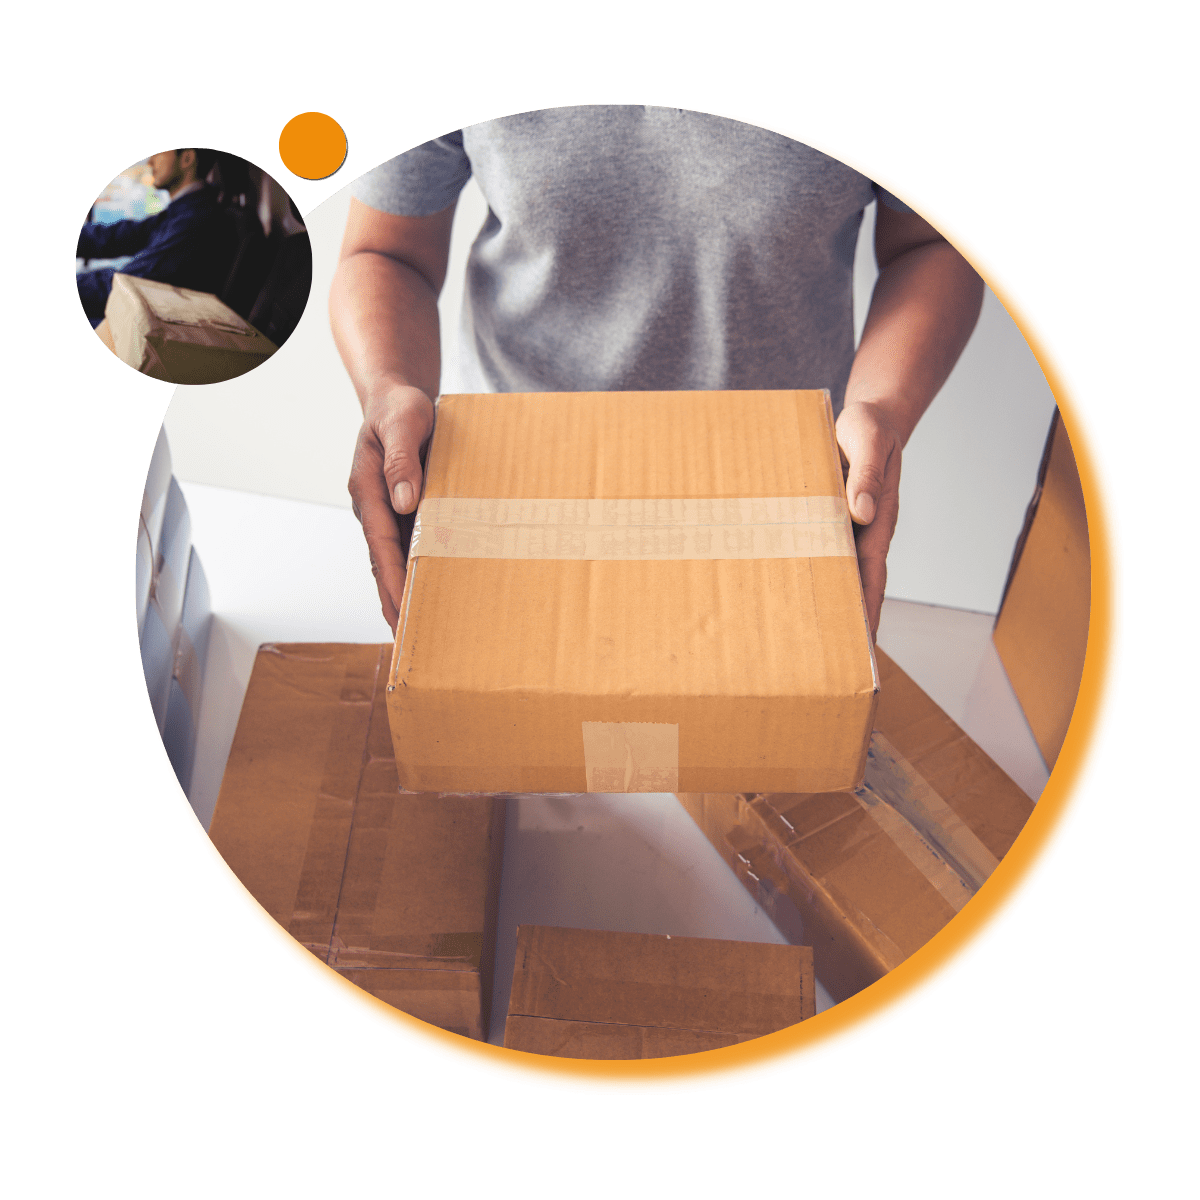 Why use product kitting? - Contract Packing and Kitting